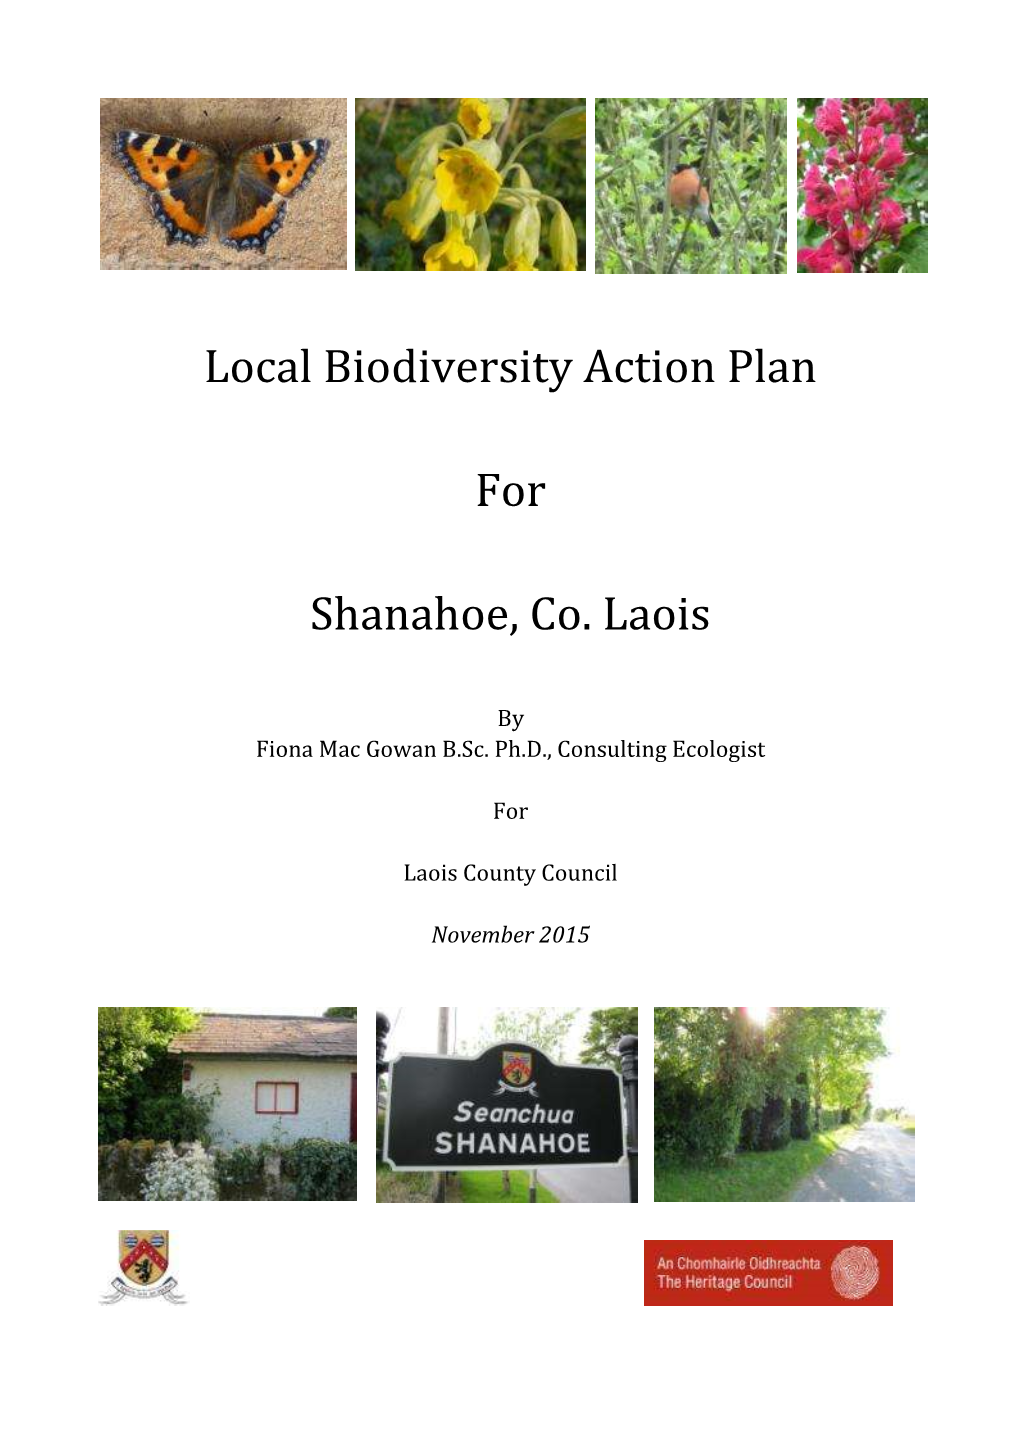 Local Biodiversity Action Plan for Shanahoe, Co. Laois